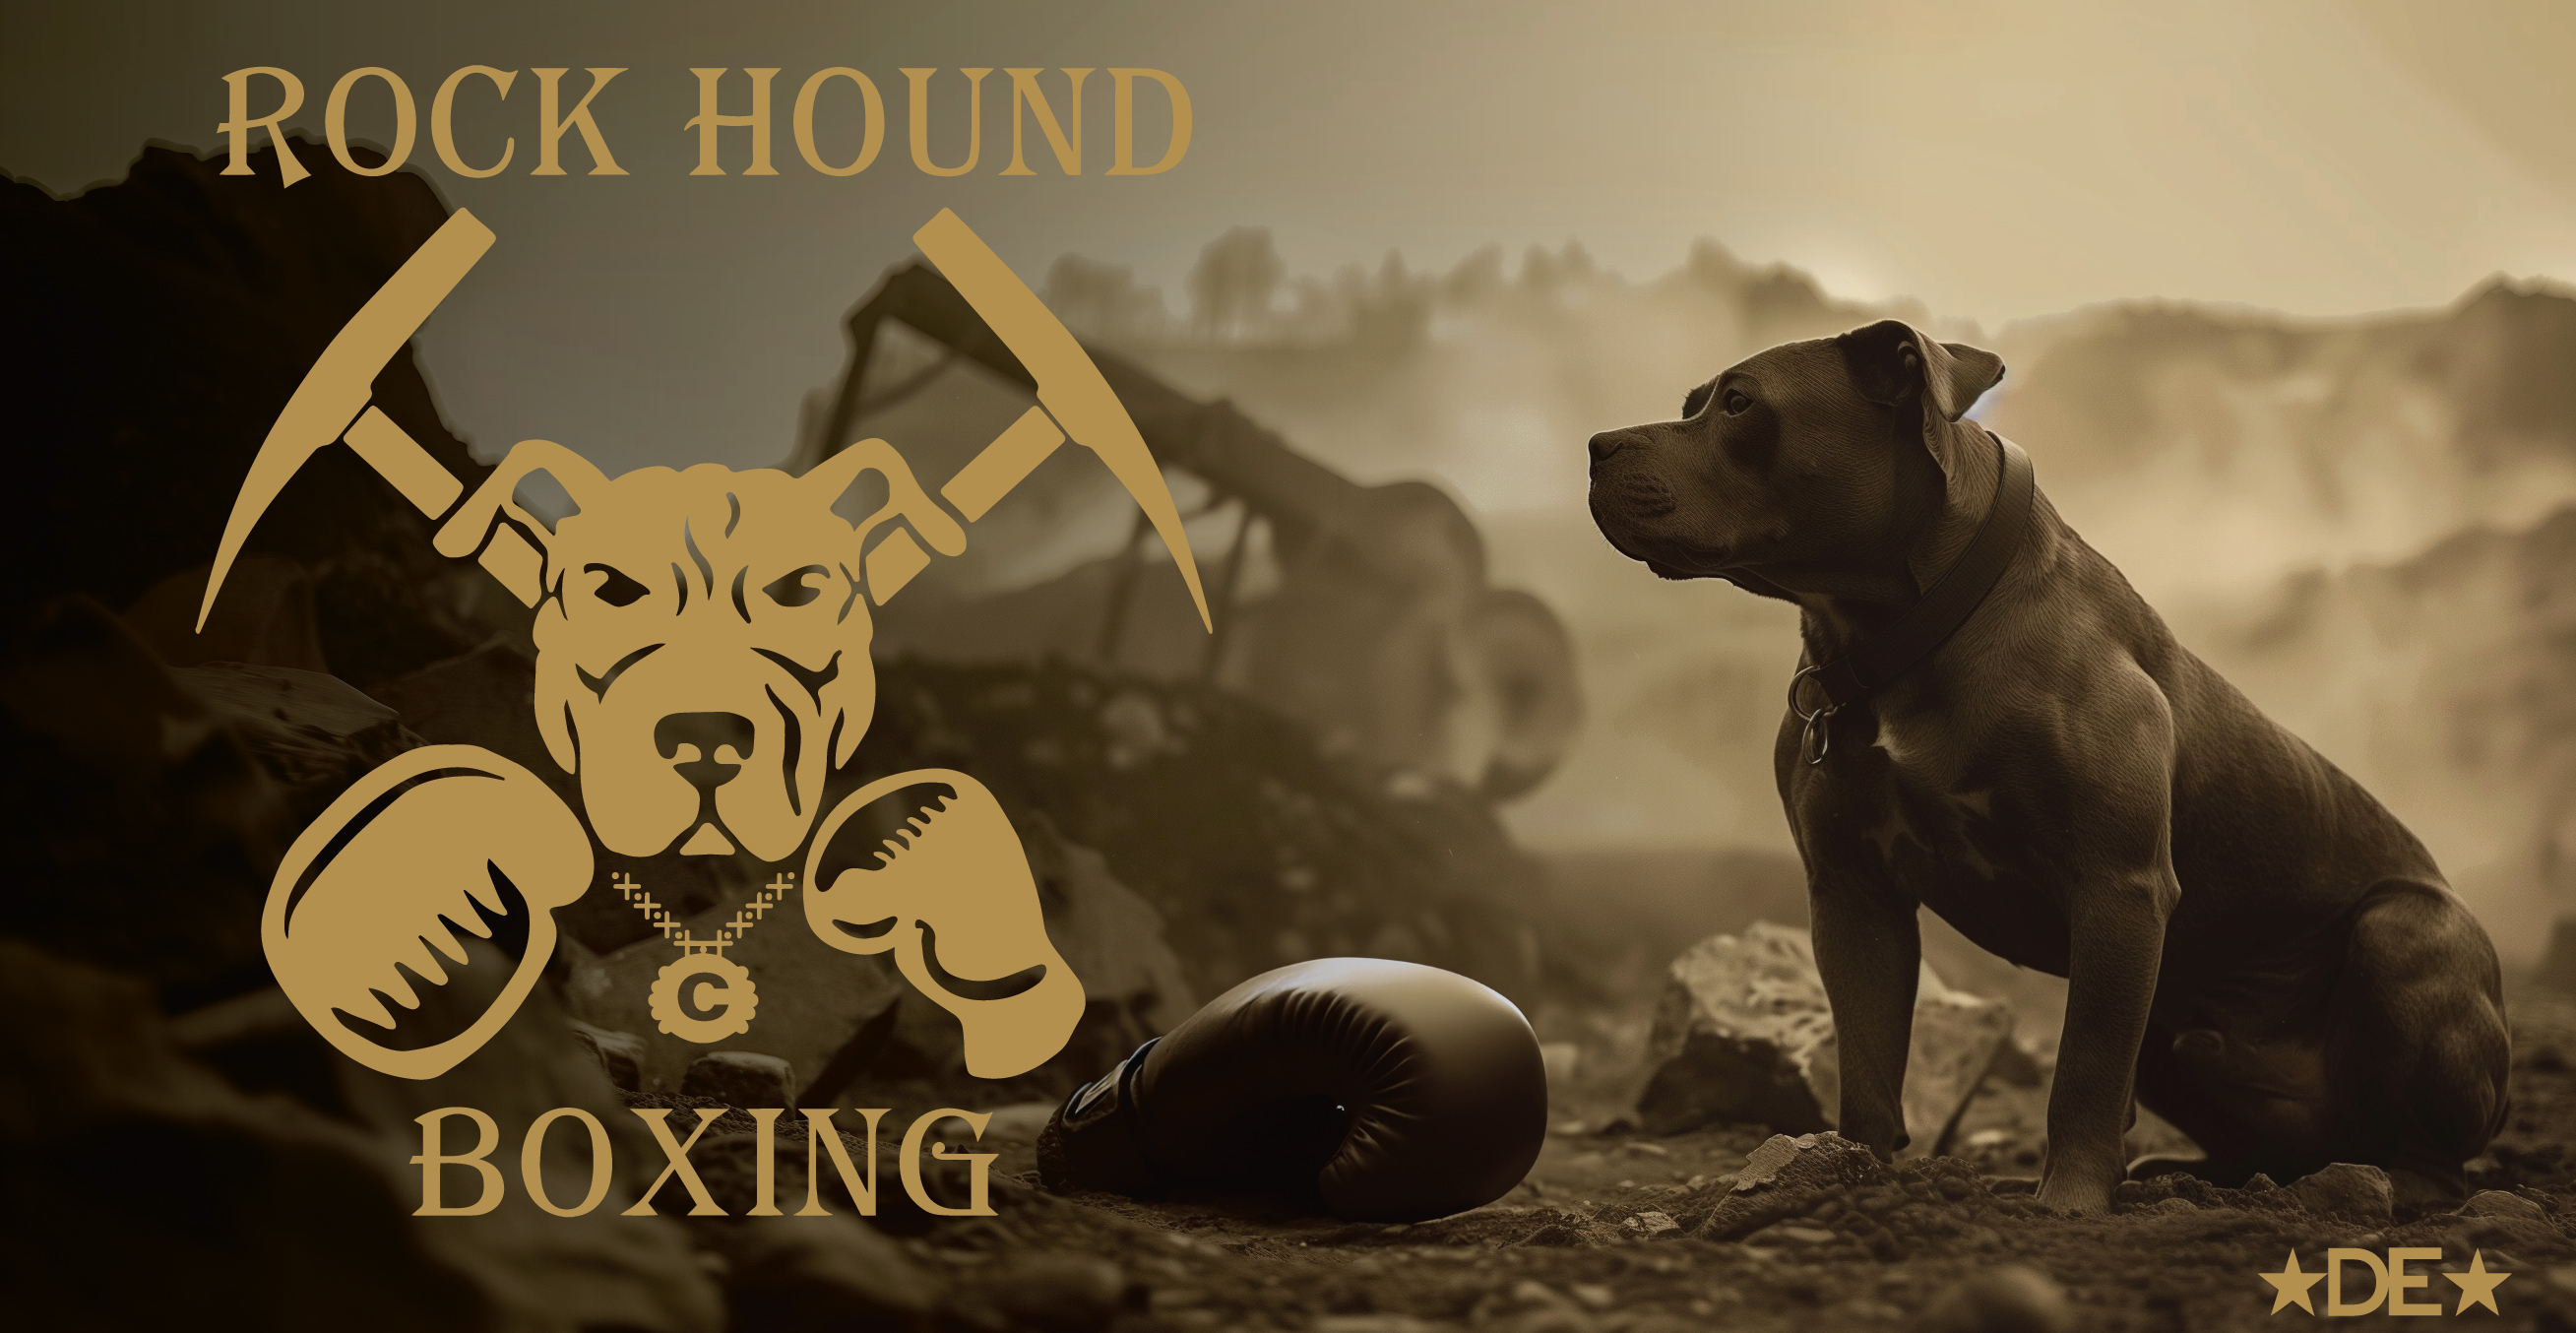 Rock Hound Boxing Apparel